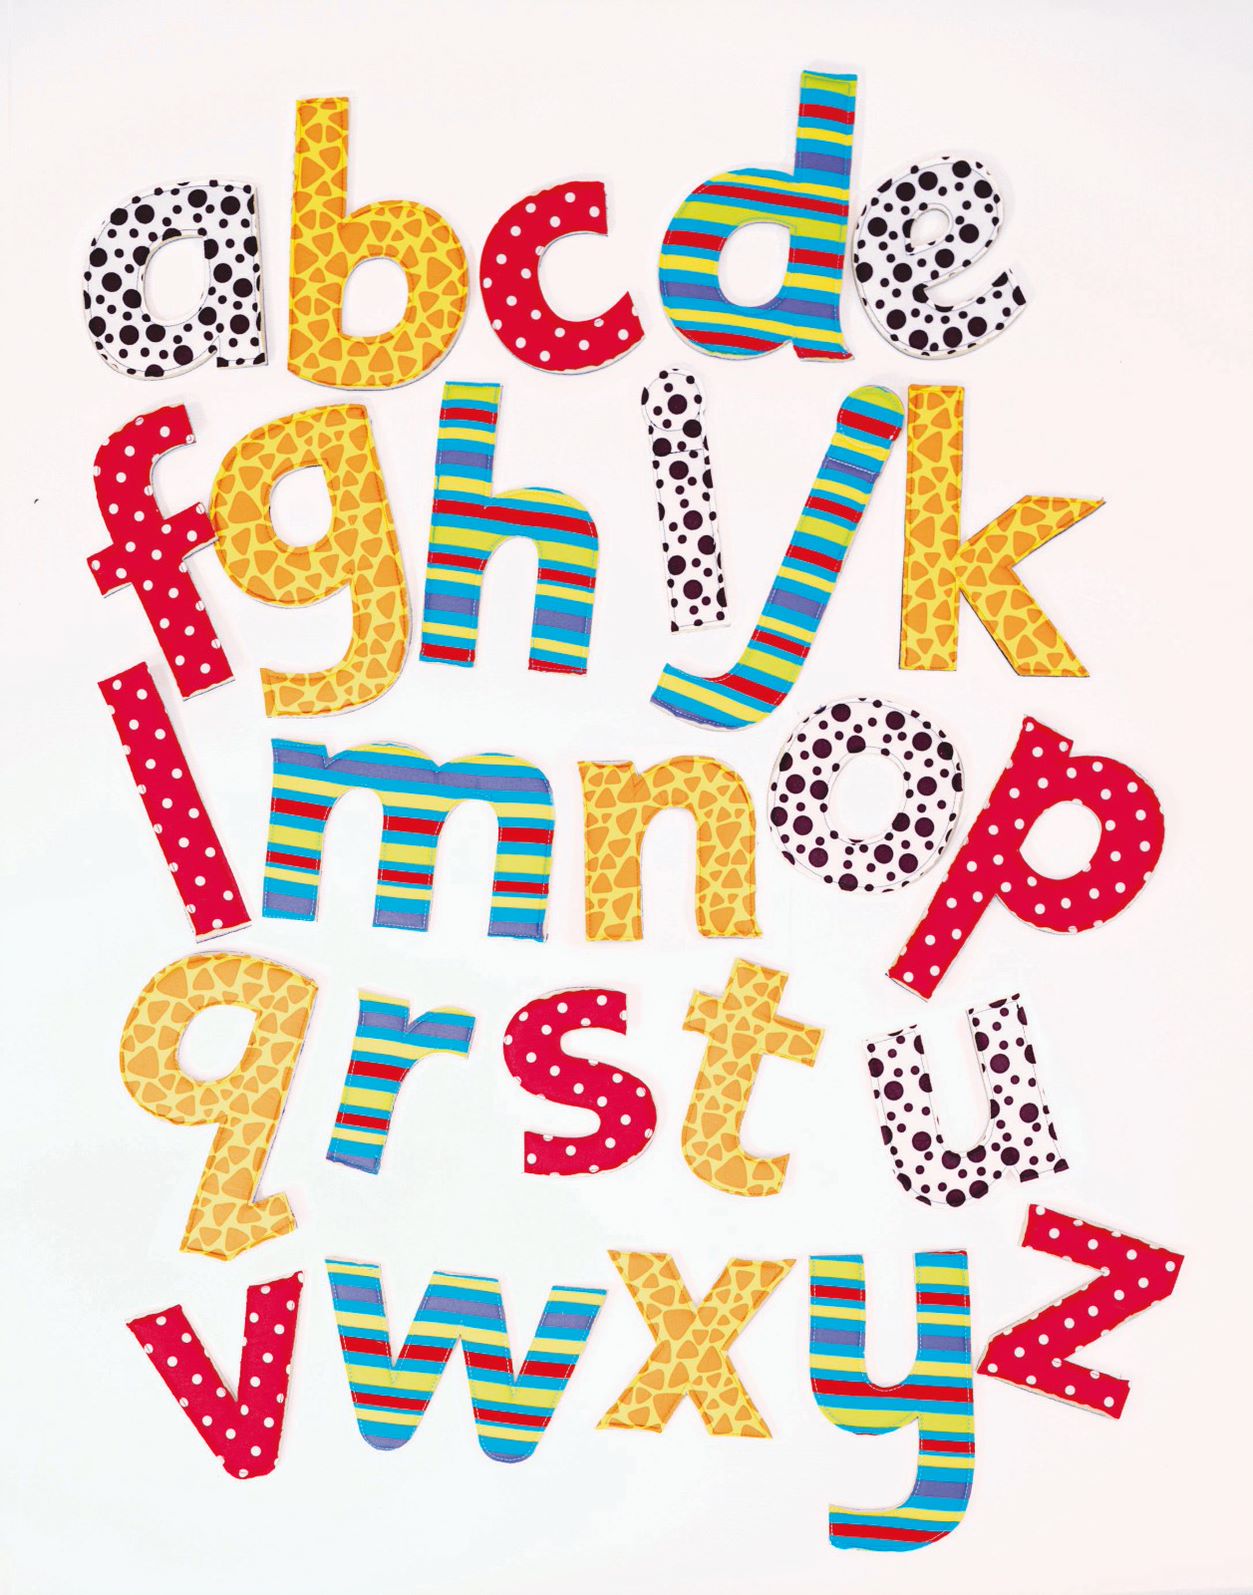 Feely Fabric Letters